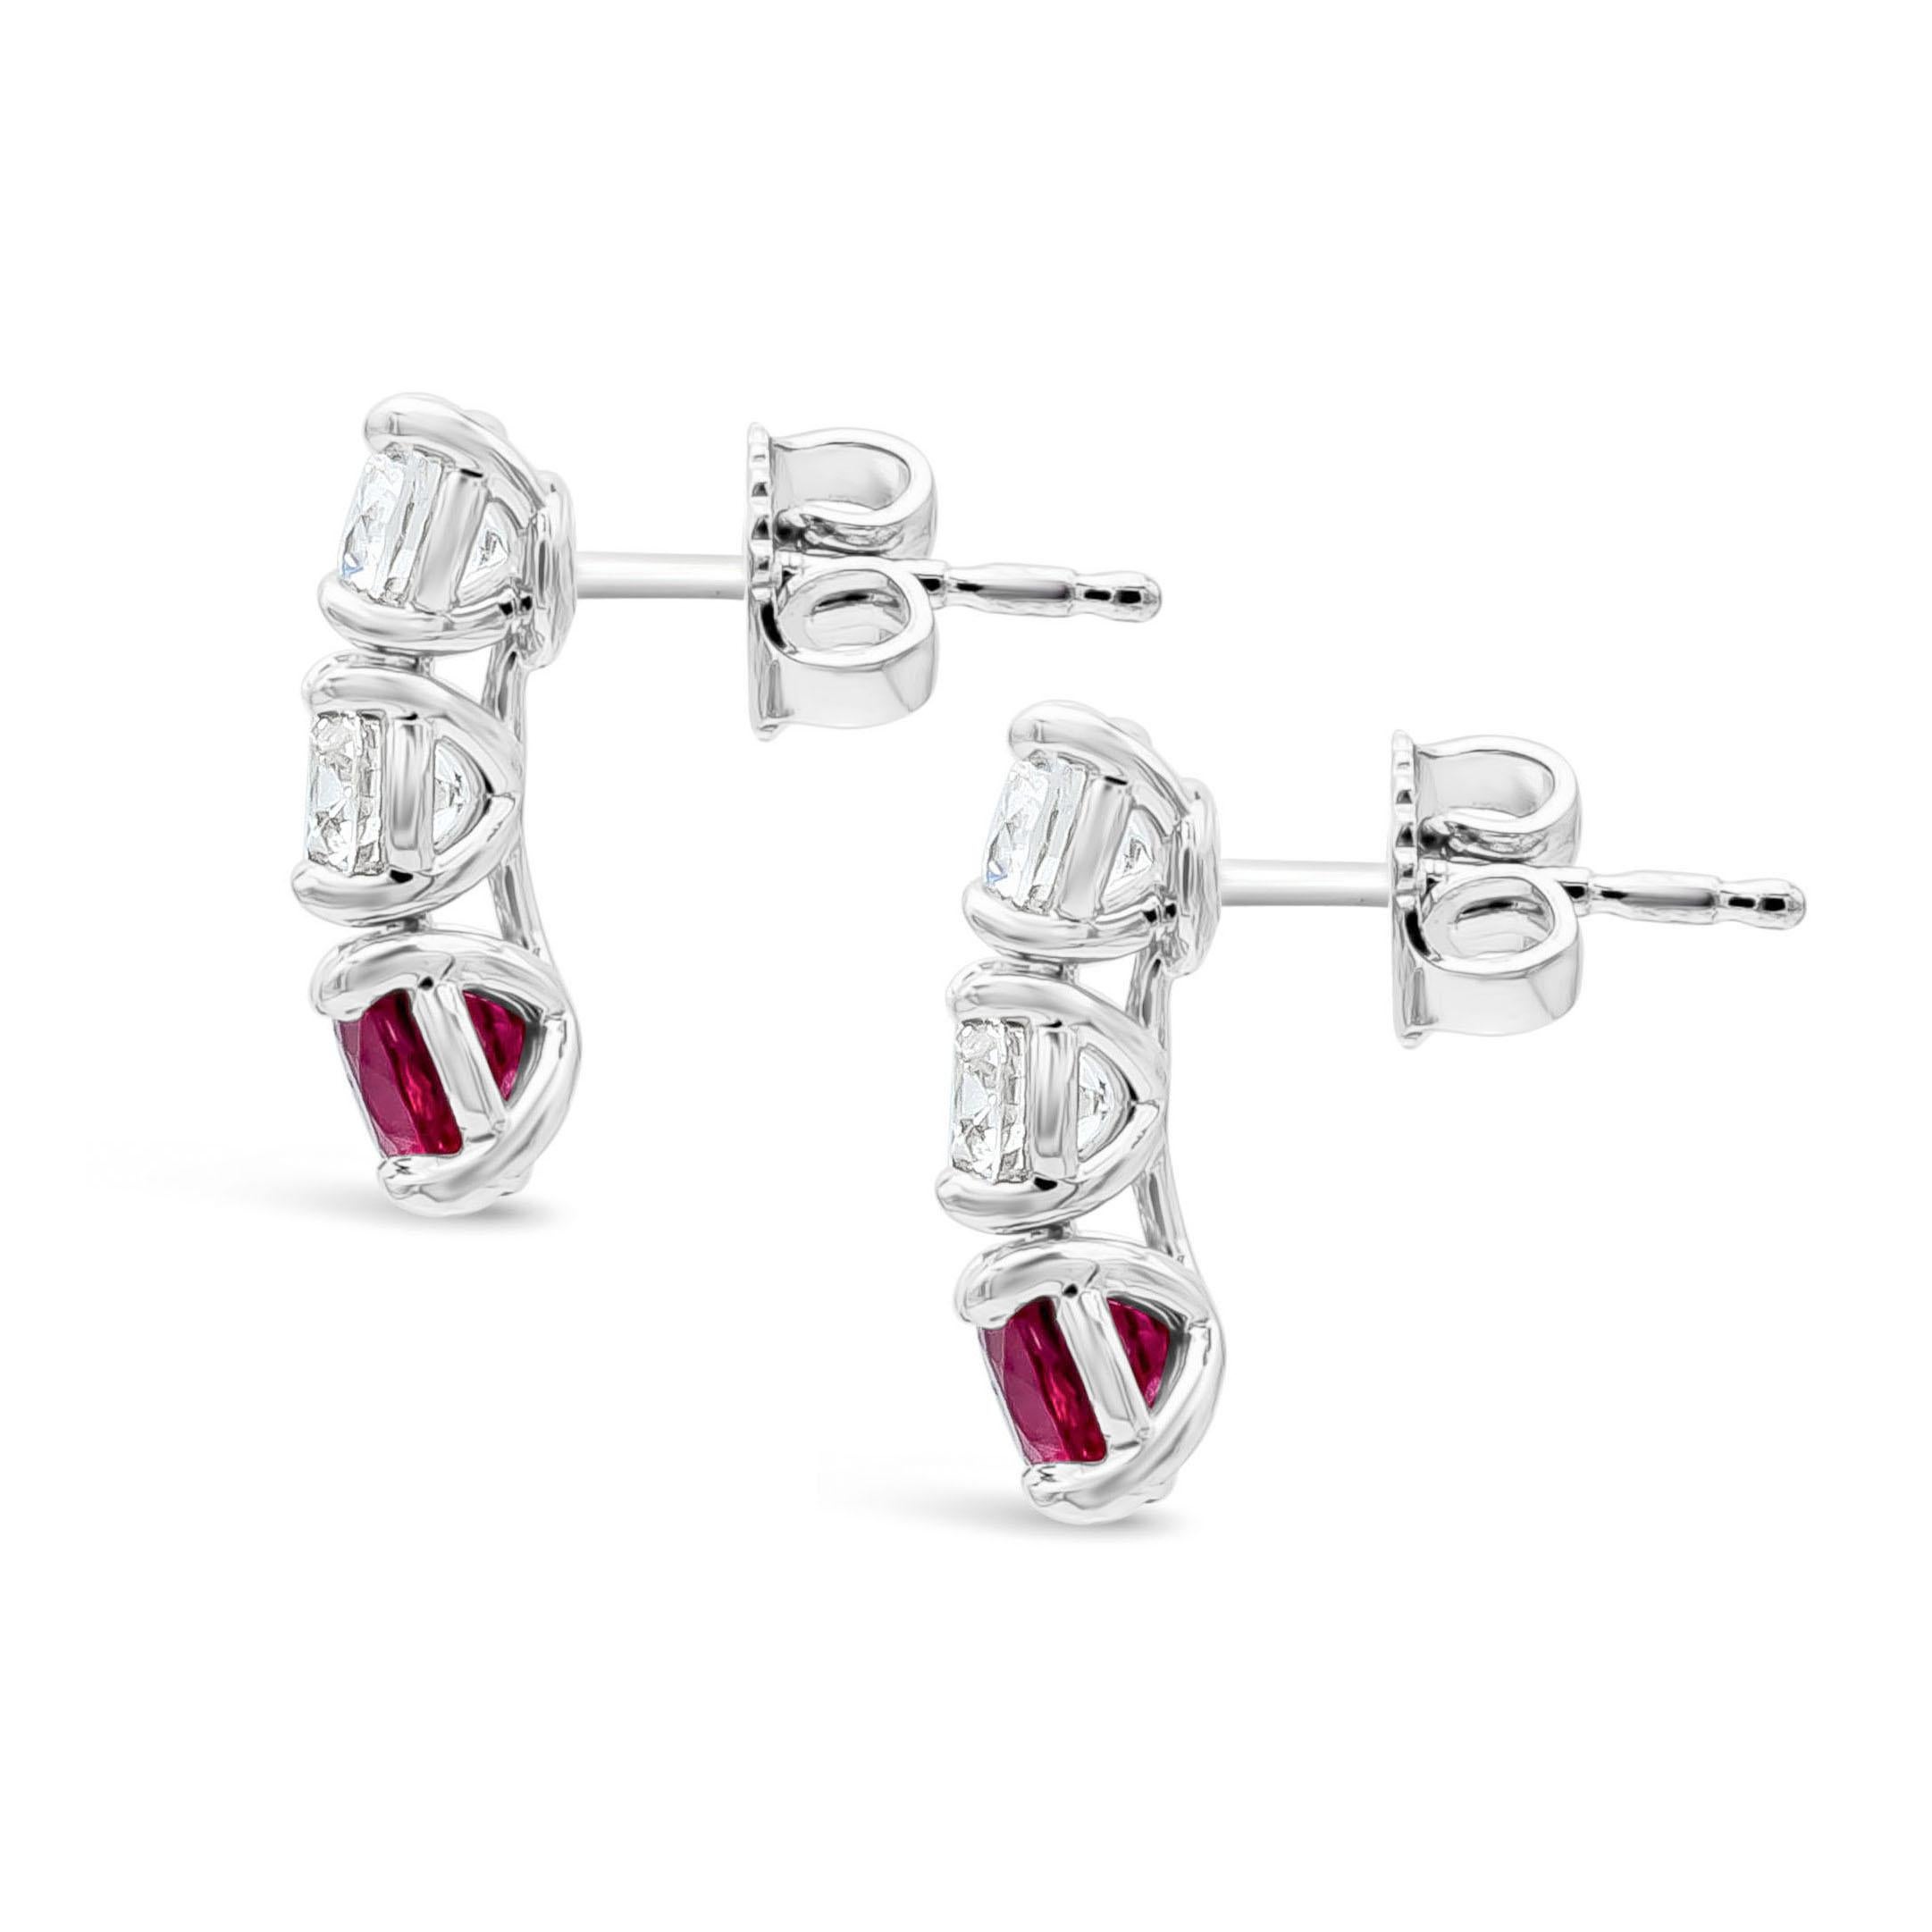 Contemporary Roman Malakov 3.11 Carats Total Round Cut Burma Ruby and Diamond Drop Earrings For Sale